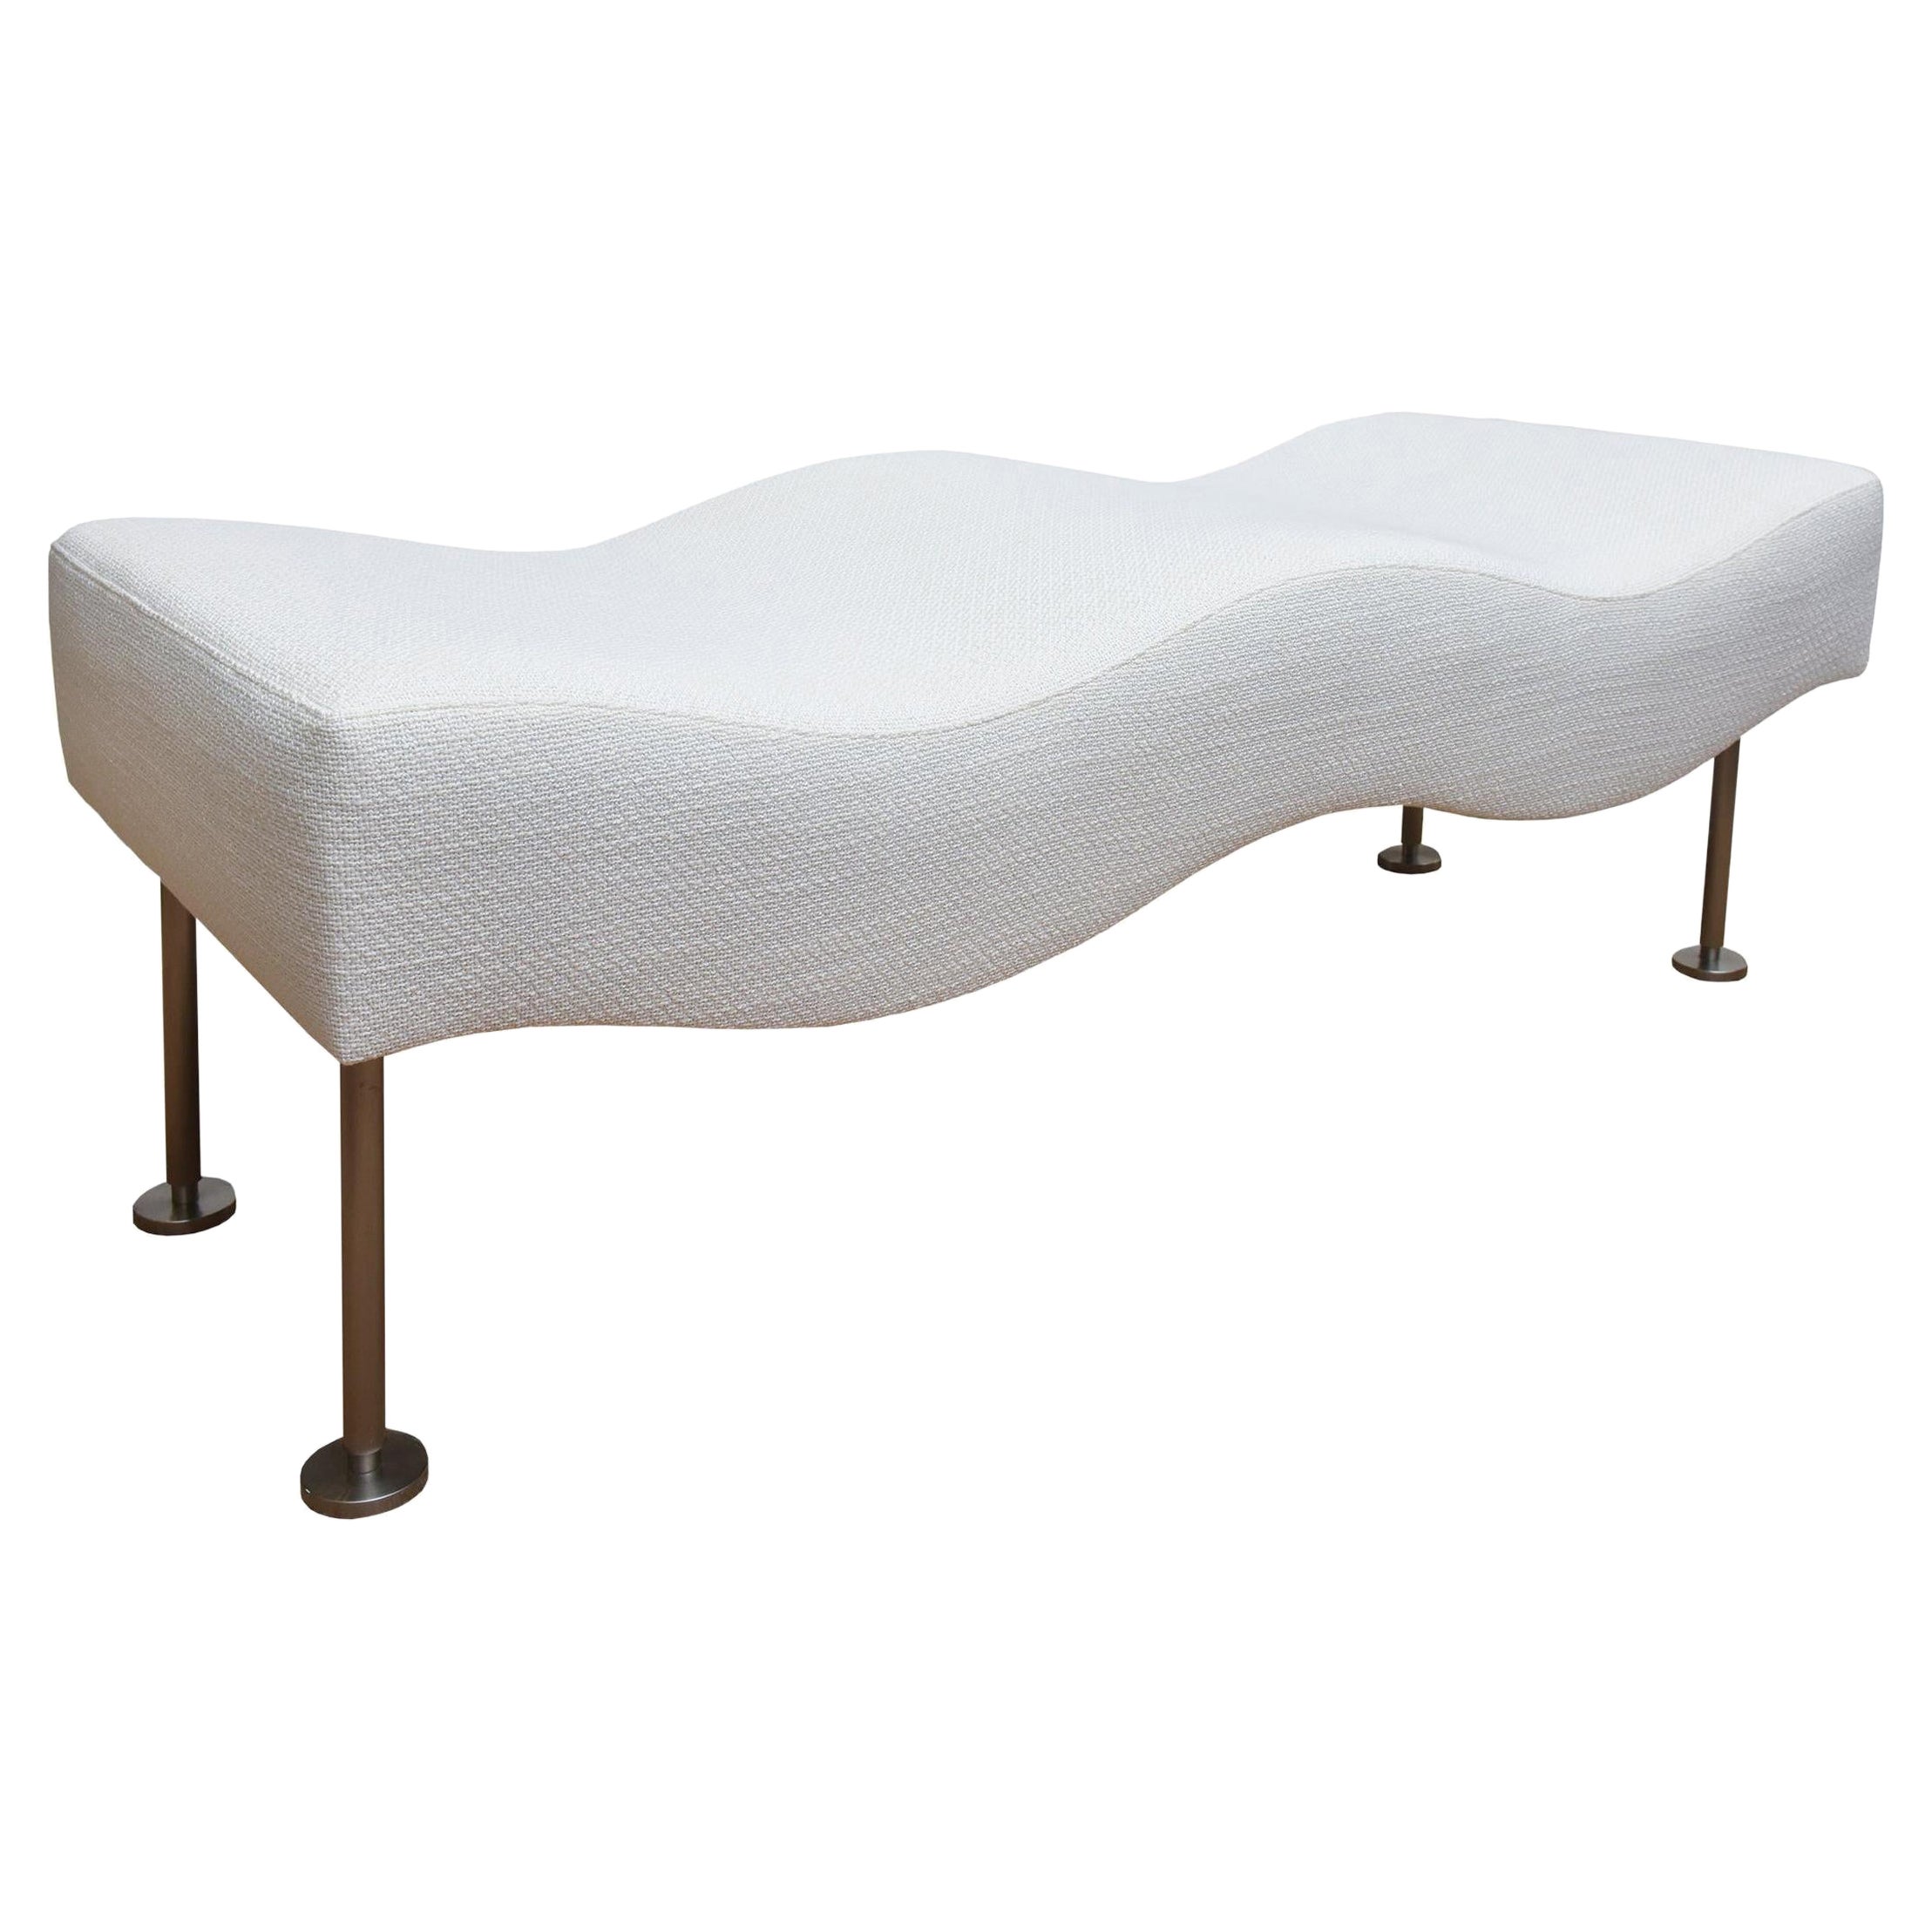 Brueton Undulatus Wave Chaise Bench Vintage with White Upholstery and Stainless